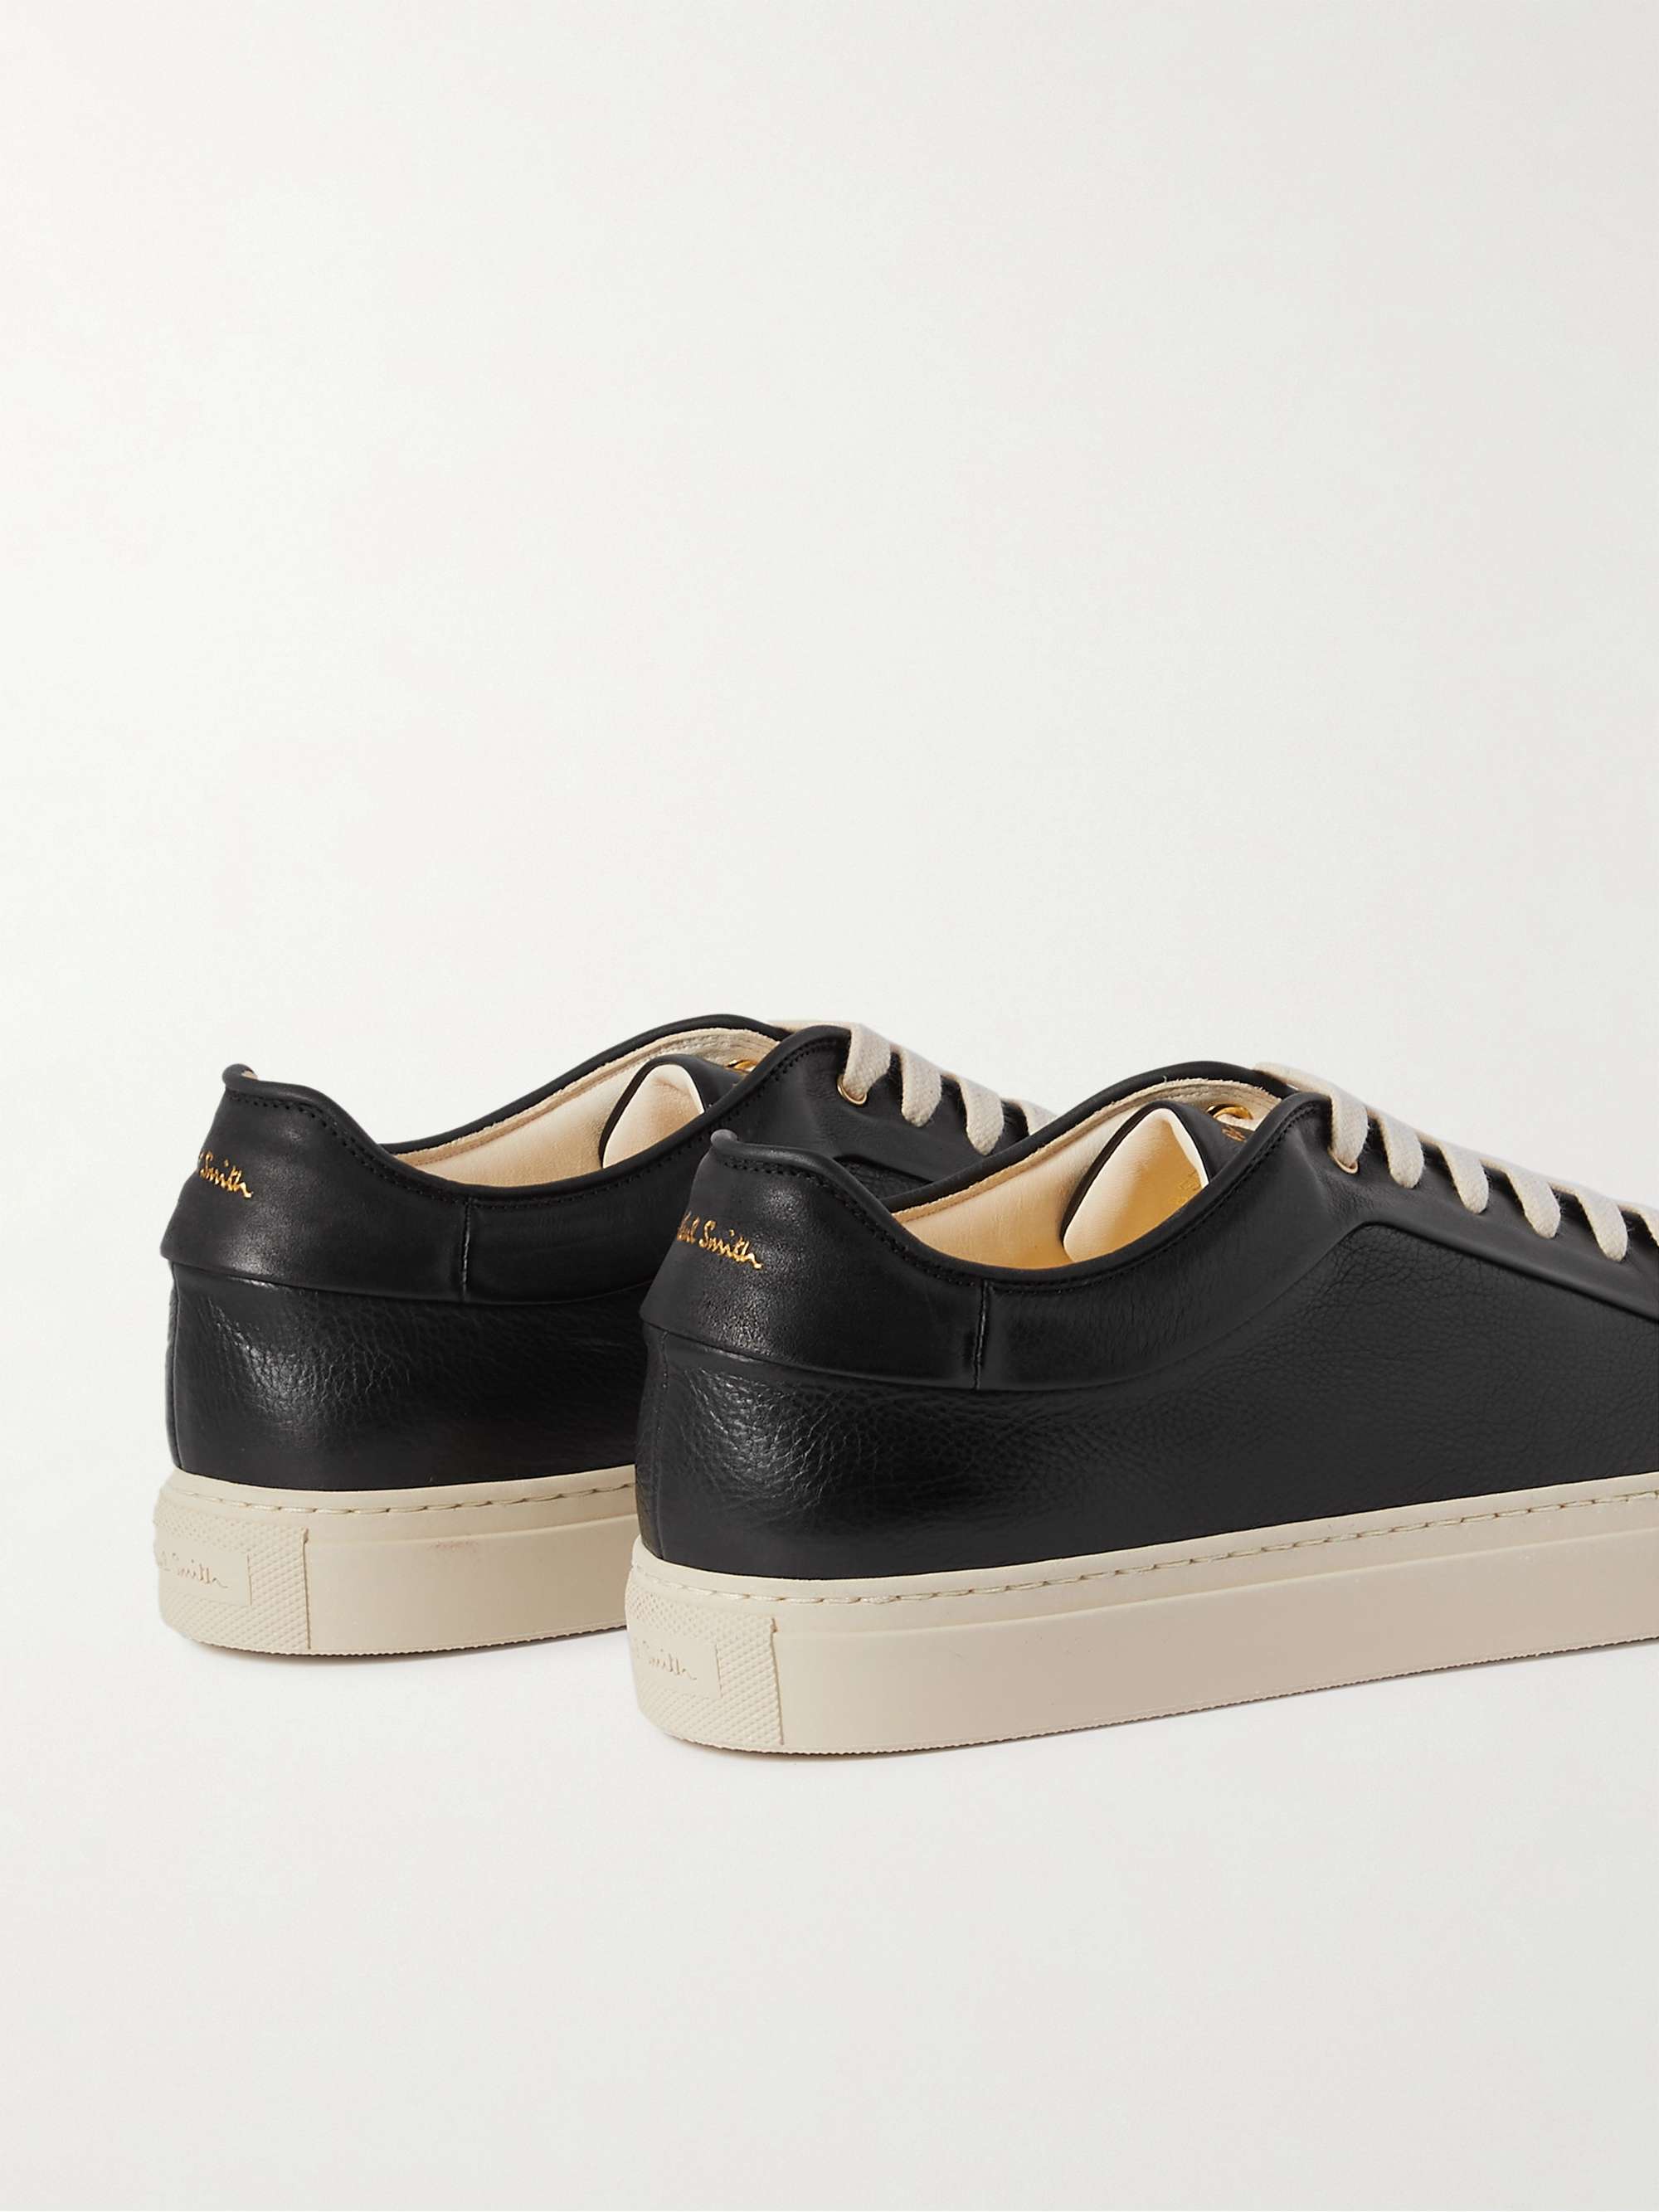 PAUL SMITH Basso Leather Sneakers